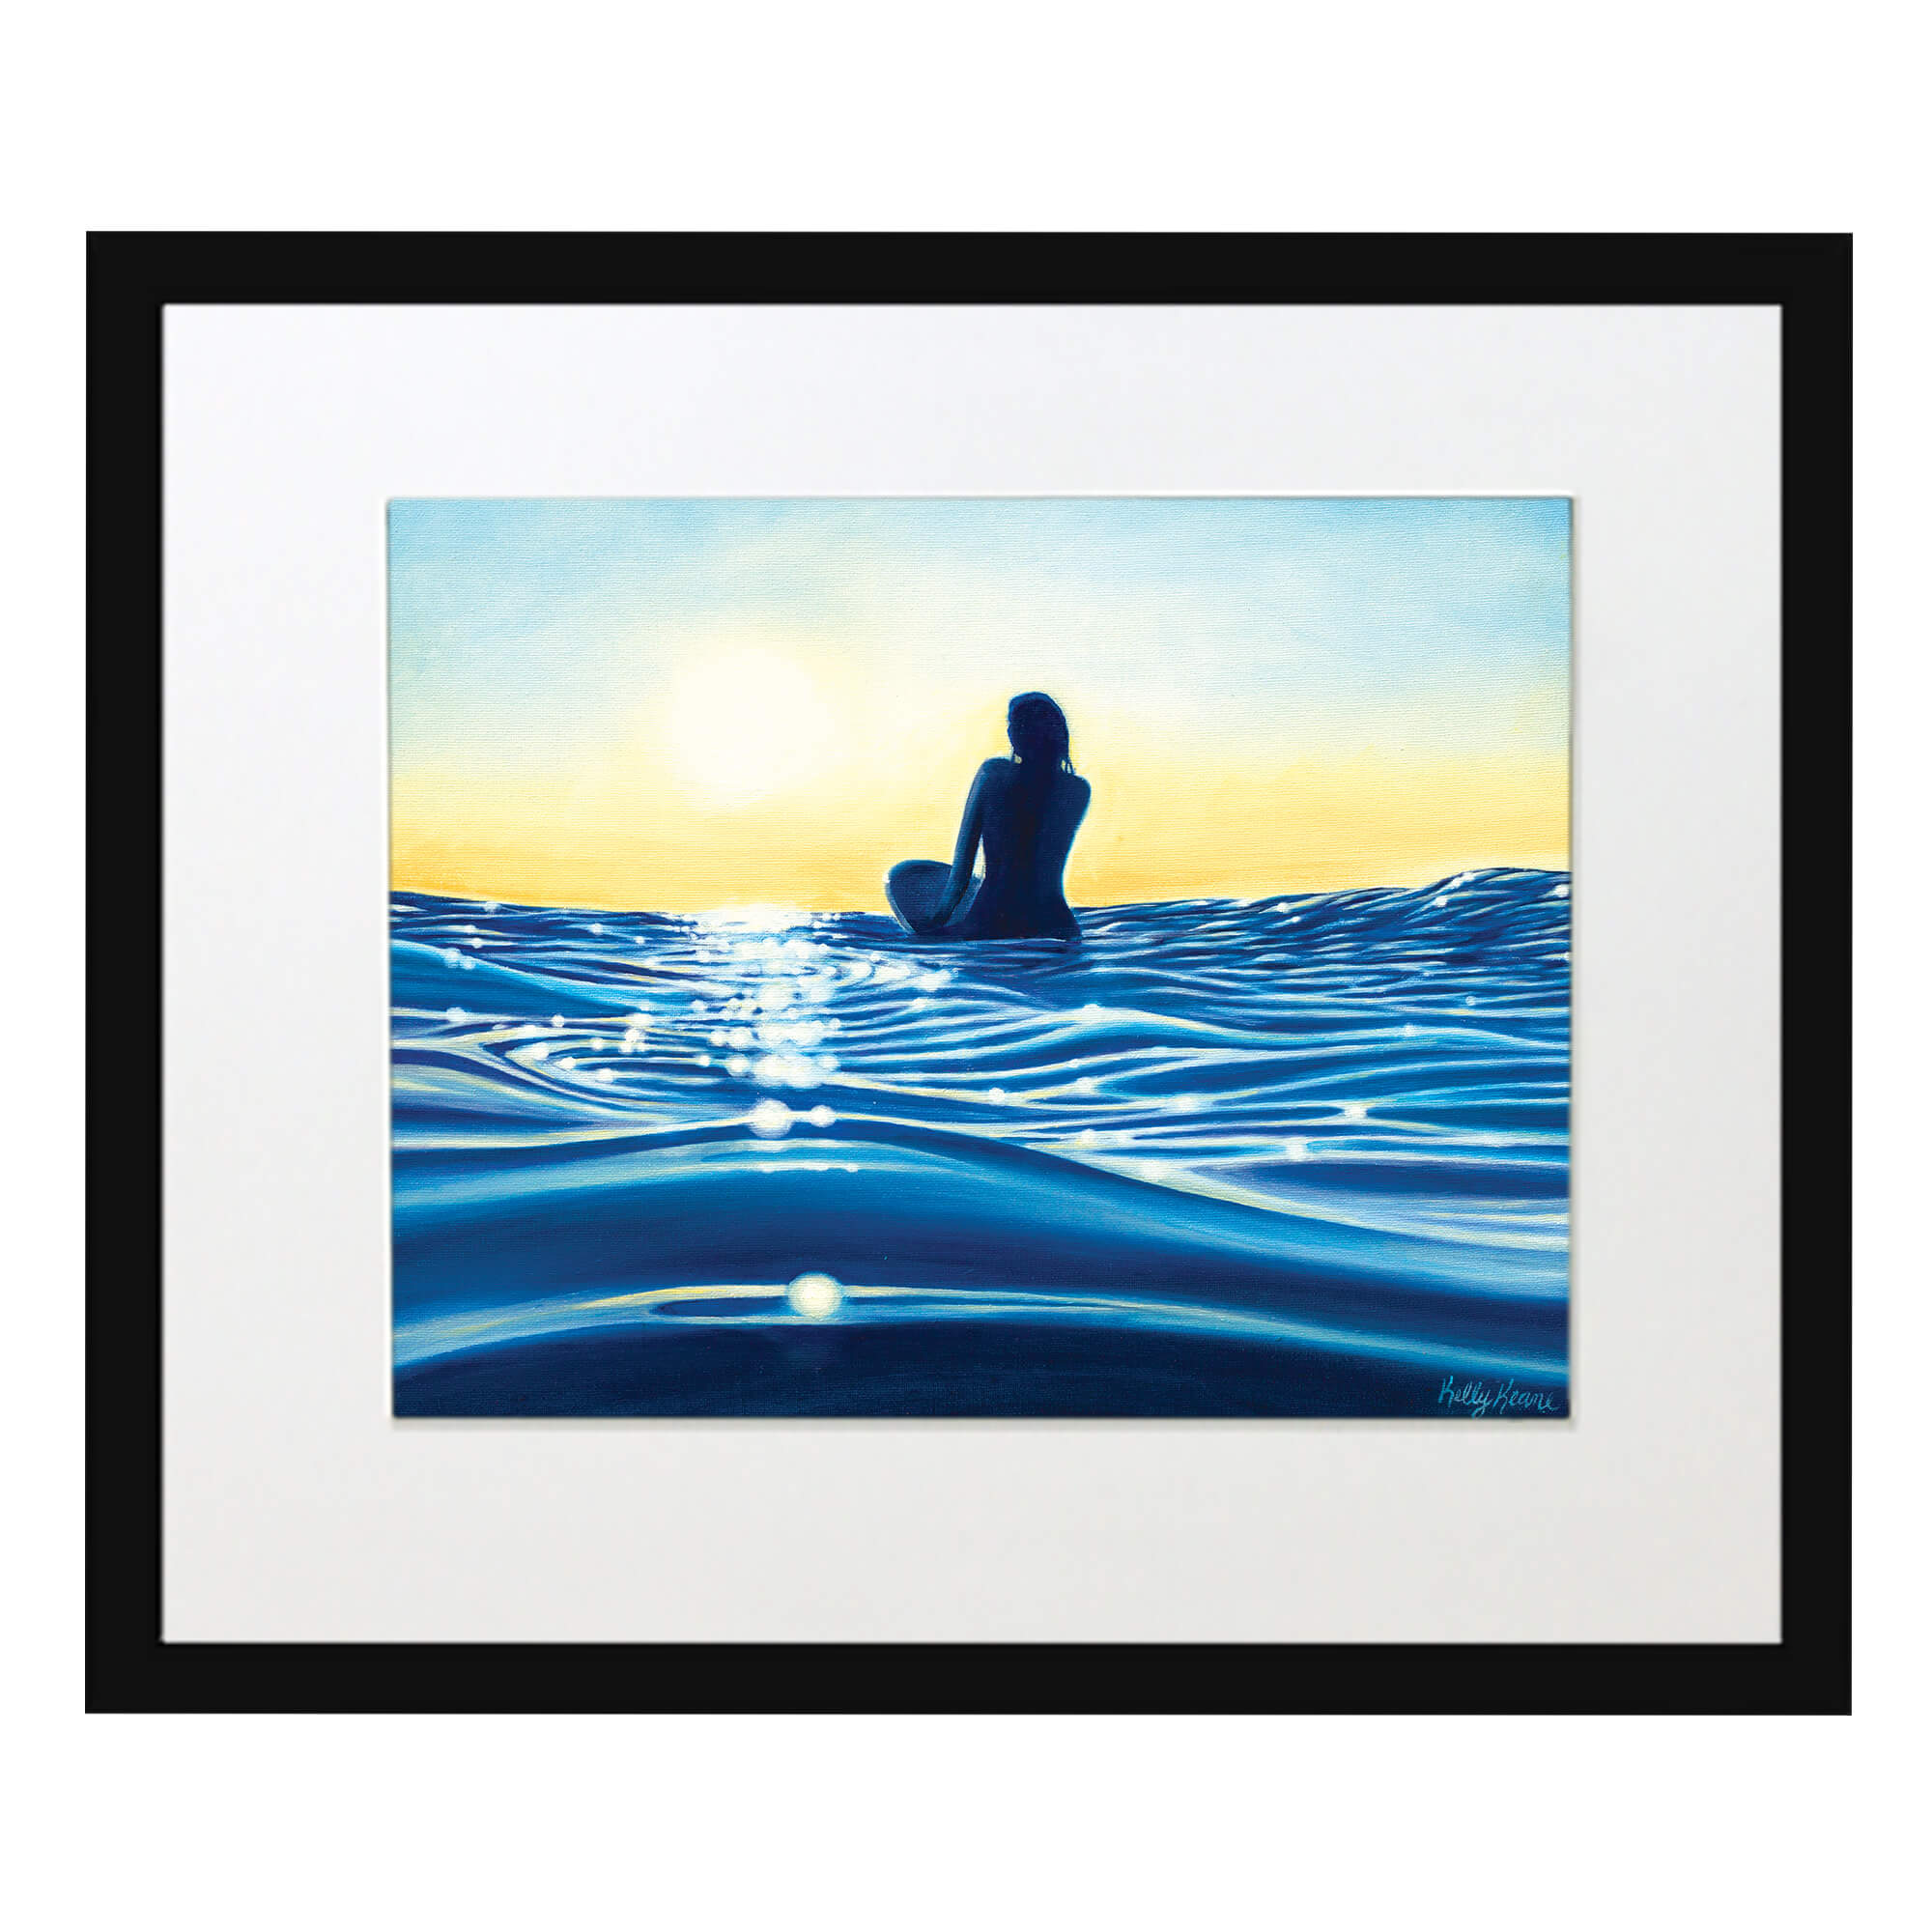 A matted art print with black frame featuring a woman surfing on calm waves by hawaii artist Kelly Keane 